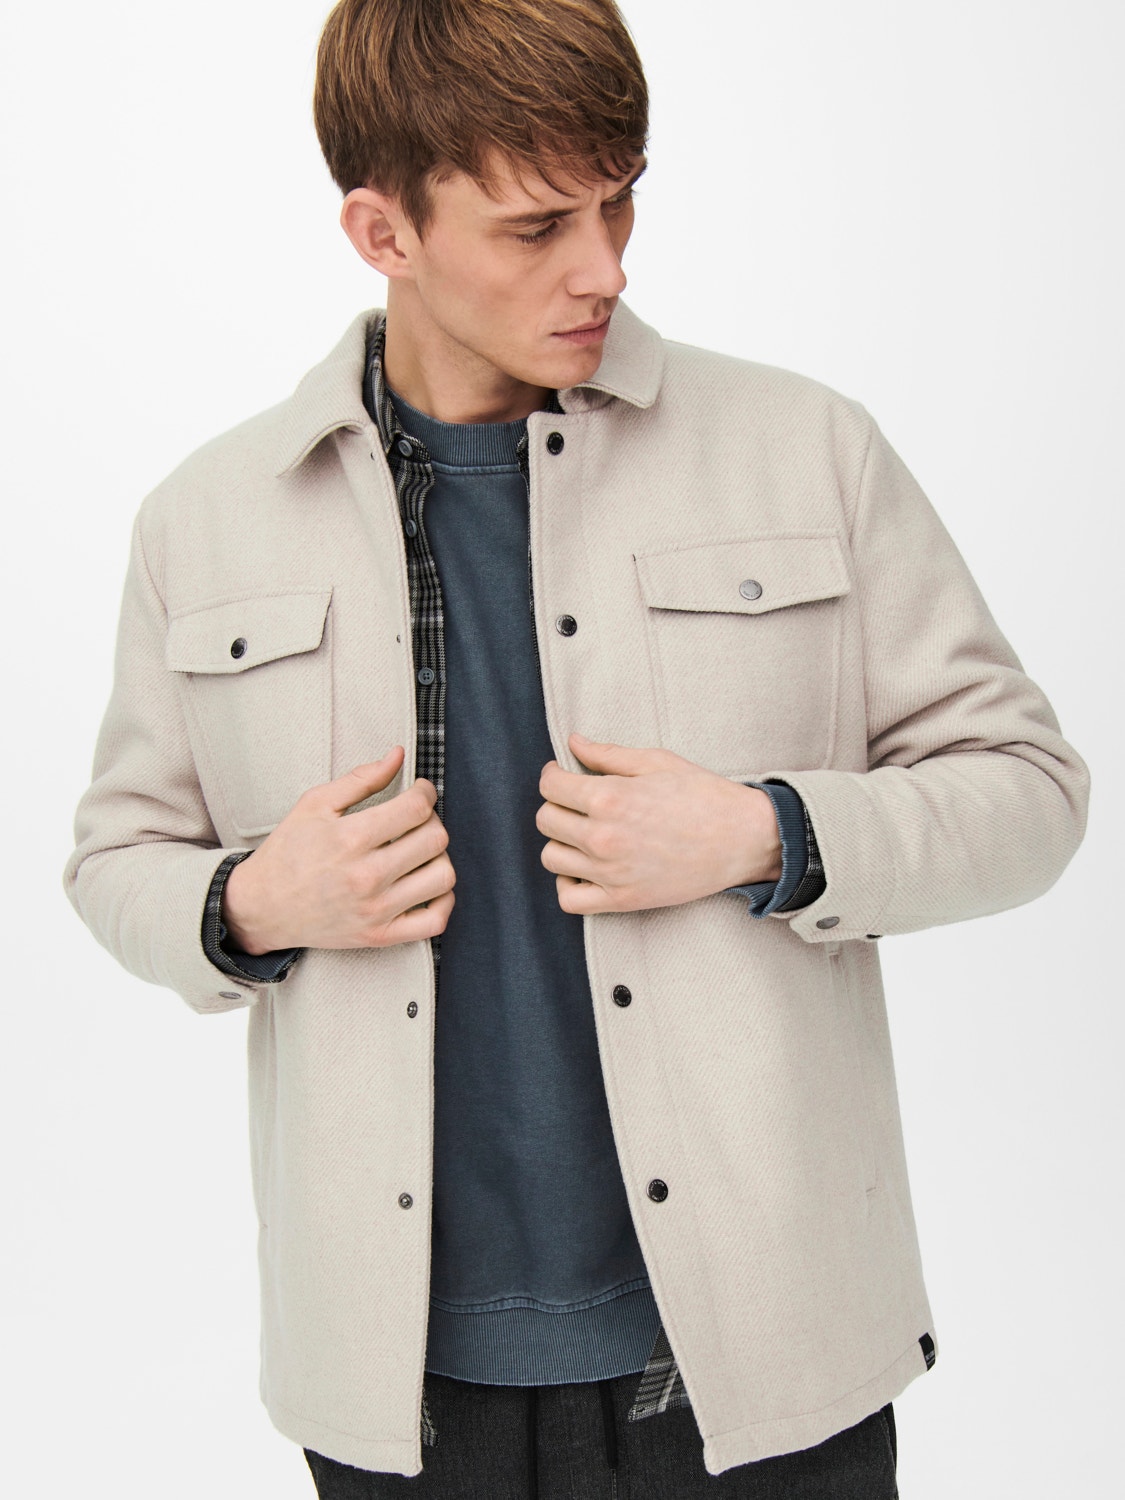 ONLY & SONS Jacket -Pelican - 22021183